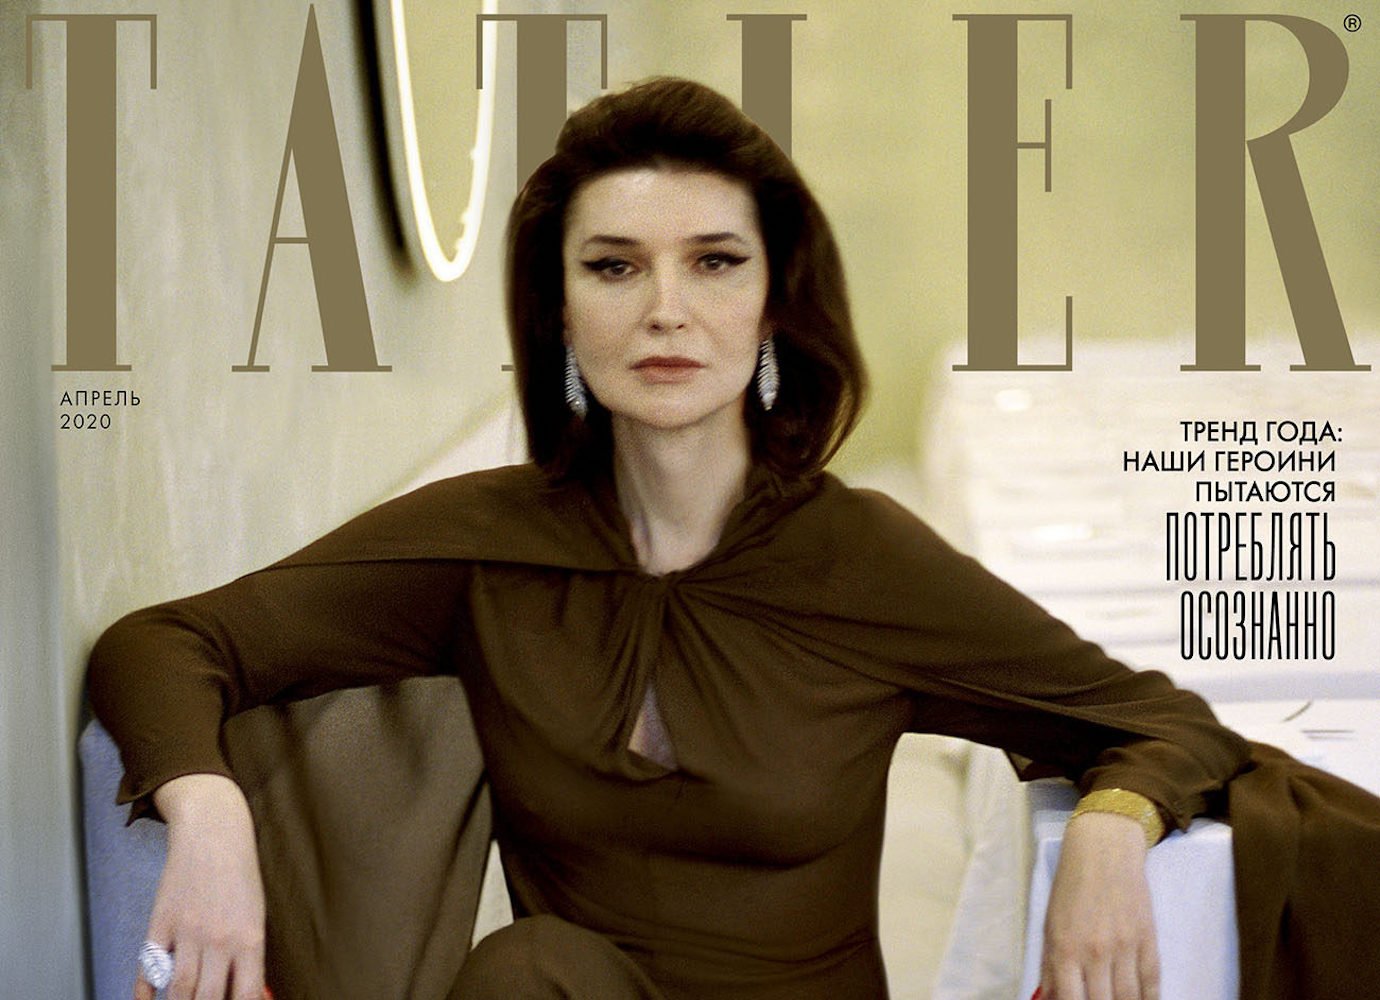 Tatler becomes first Russian glossy to feature trans cover star